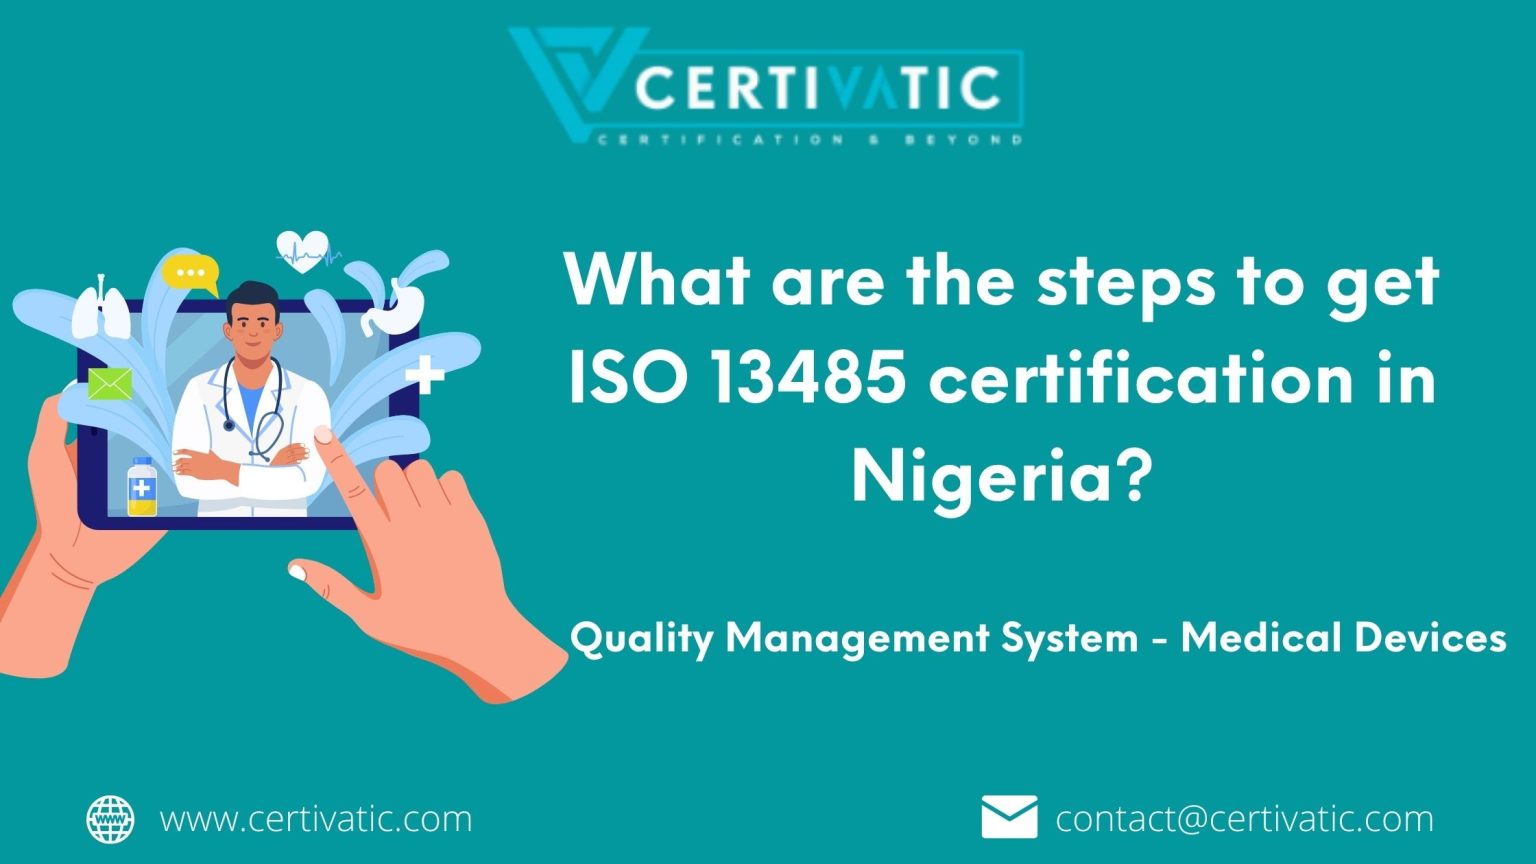 How to get ISO 13485 certification in Nigeria?